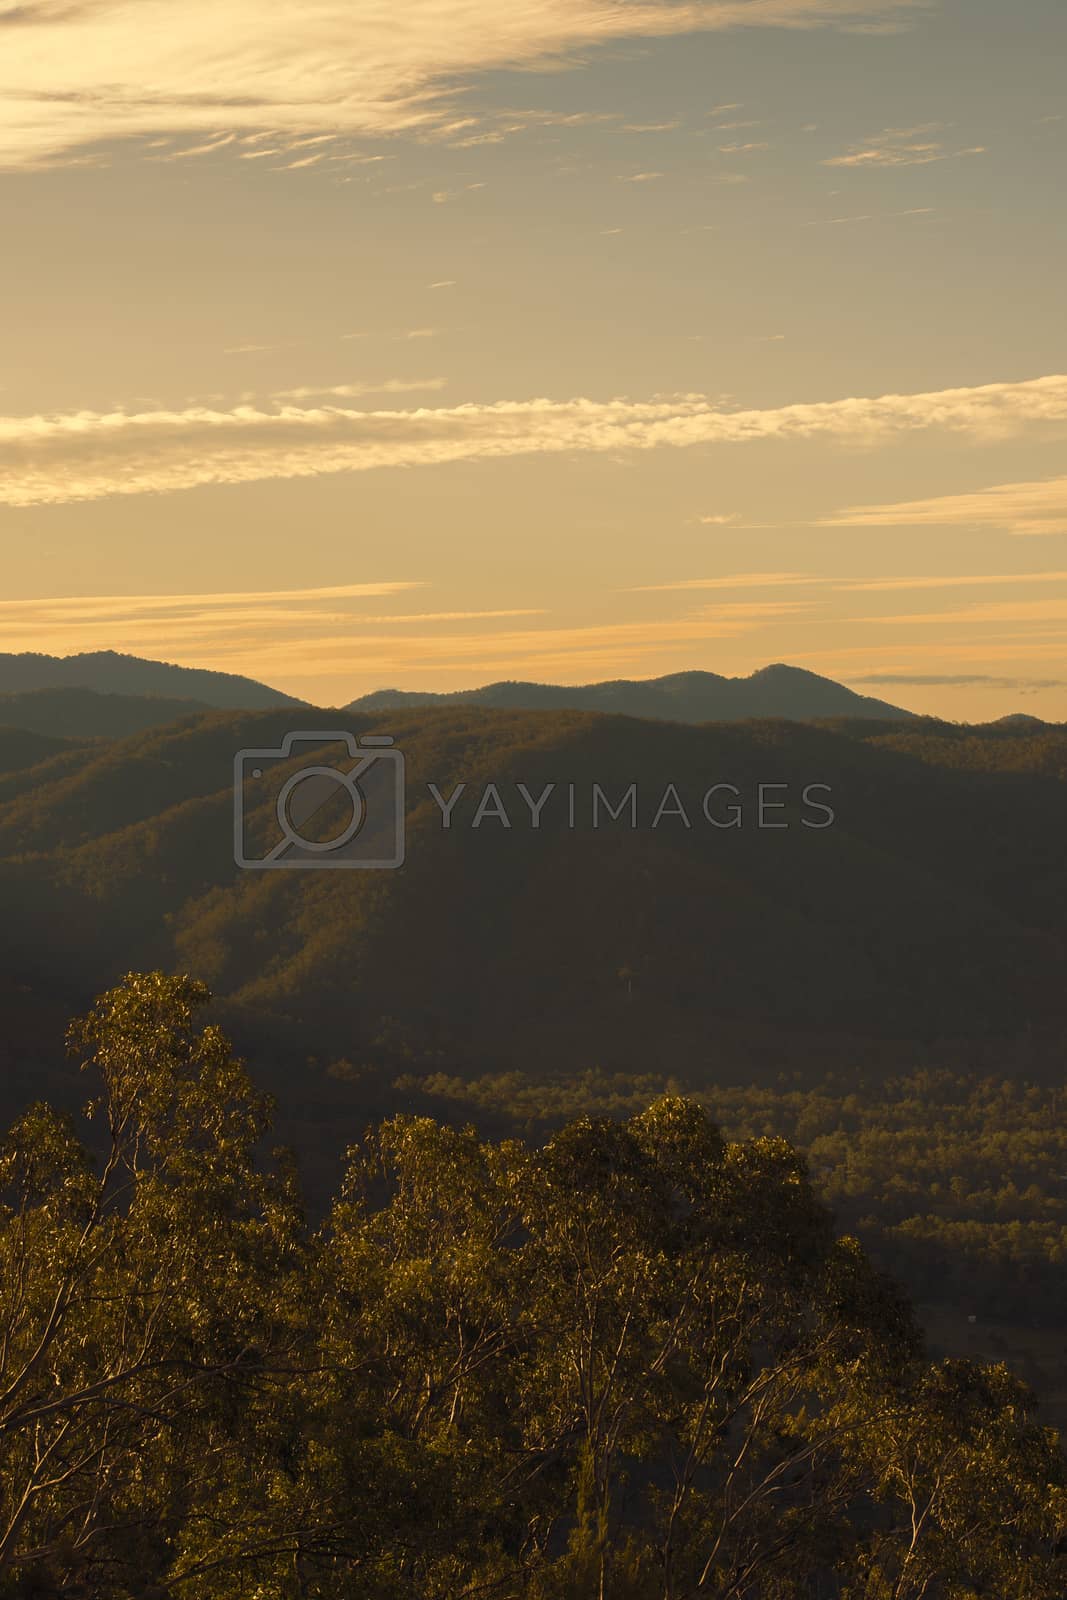 Royalty free image of View from Mount Nebo near Brisbane, Queensland. by artistrobd